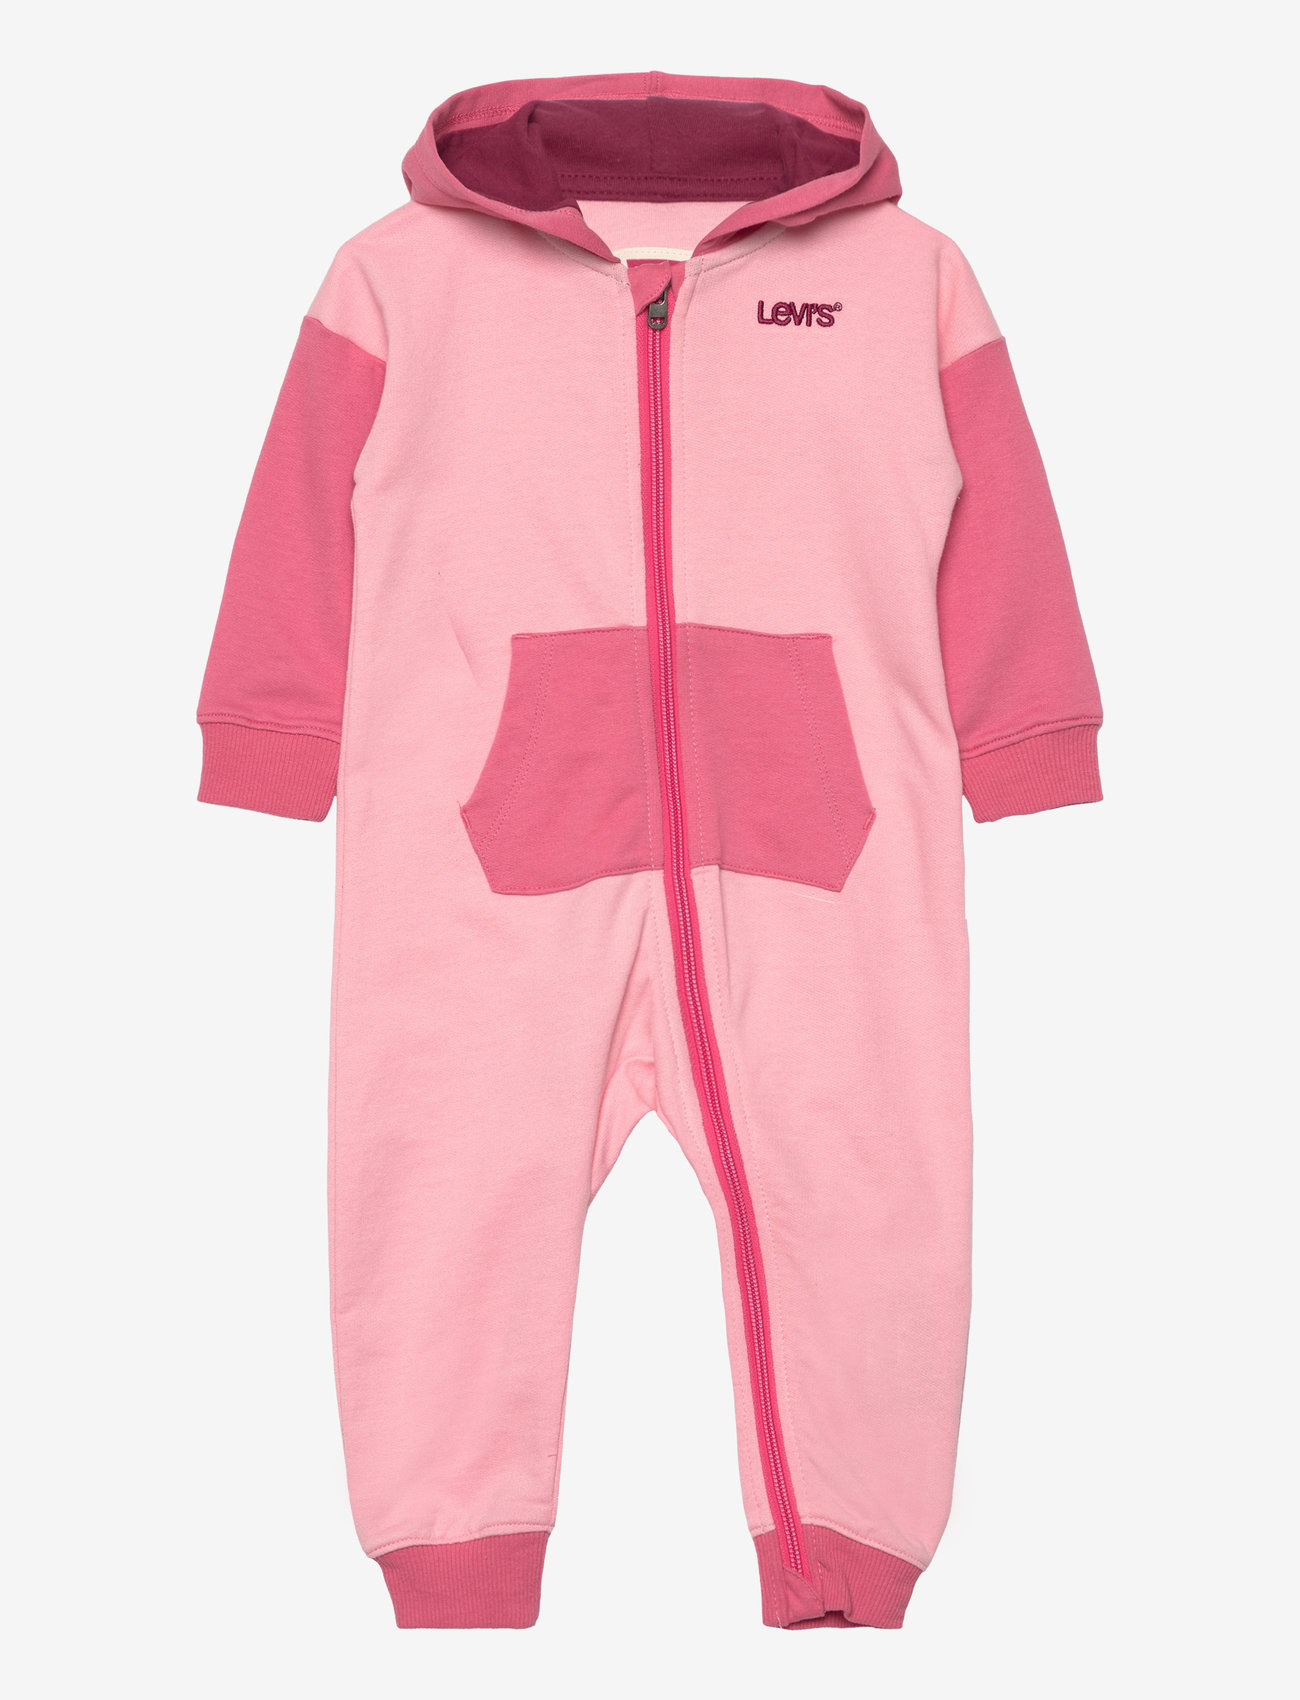 Levi's - Levi's® Colorblocked Hooded Coverall - byxdress - pink - 0